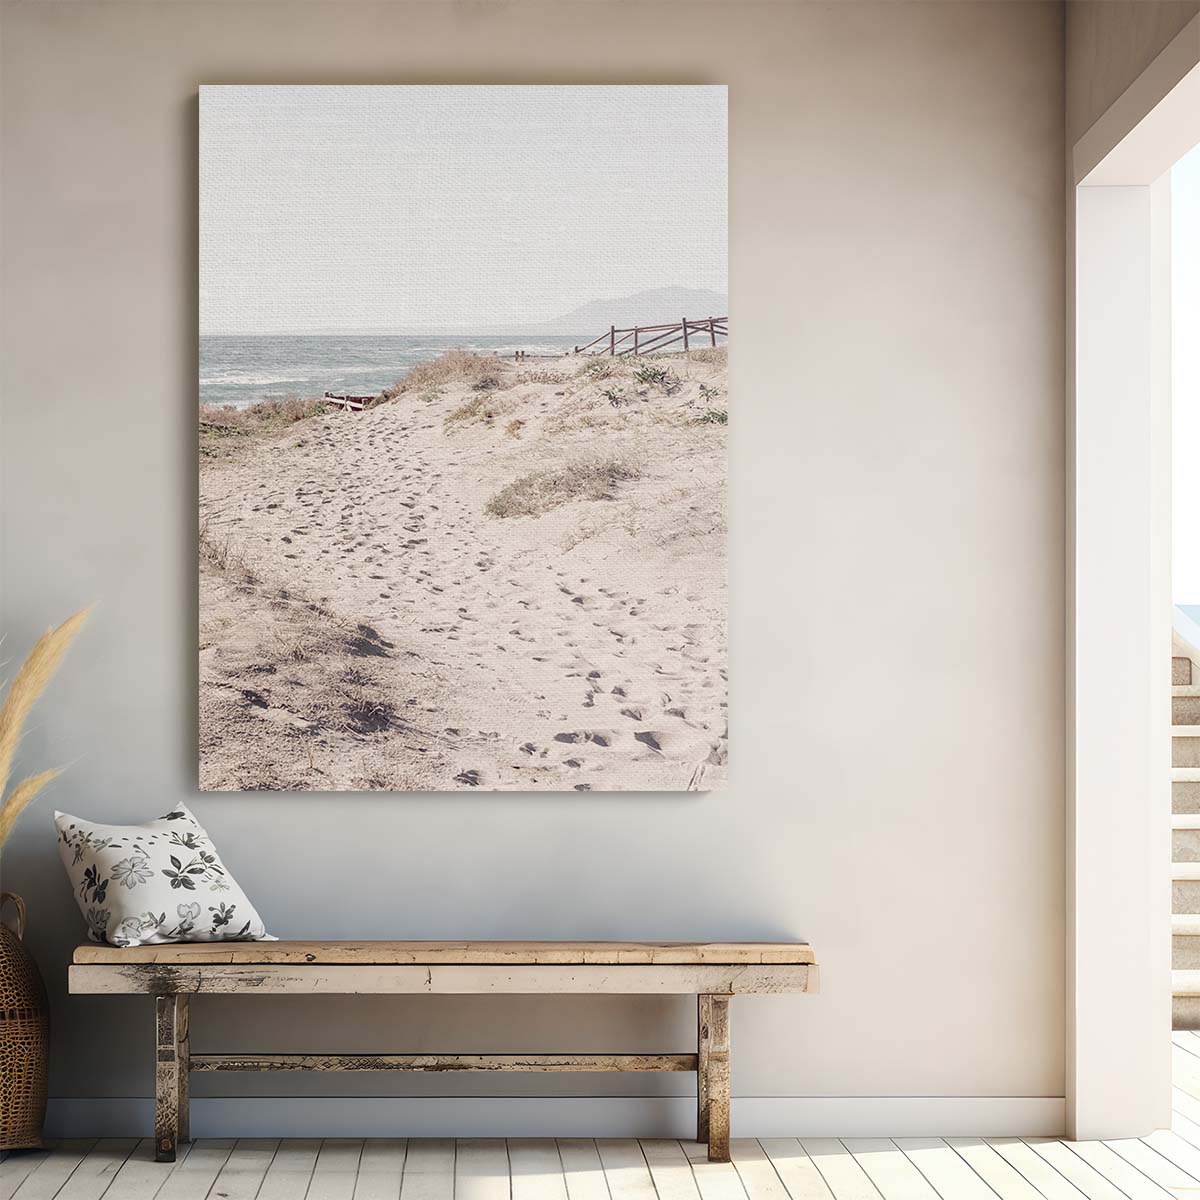 Coastal Beach Landscape Photography Seascape Shore Water Art by Luxuriance Designs, made in USA